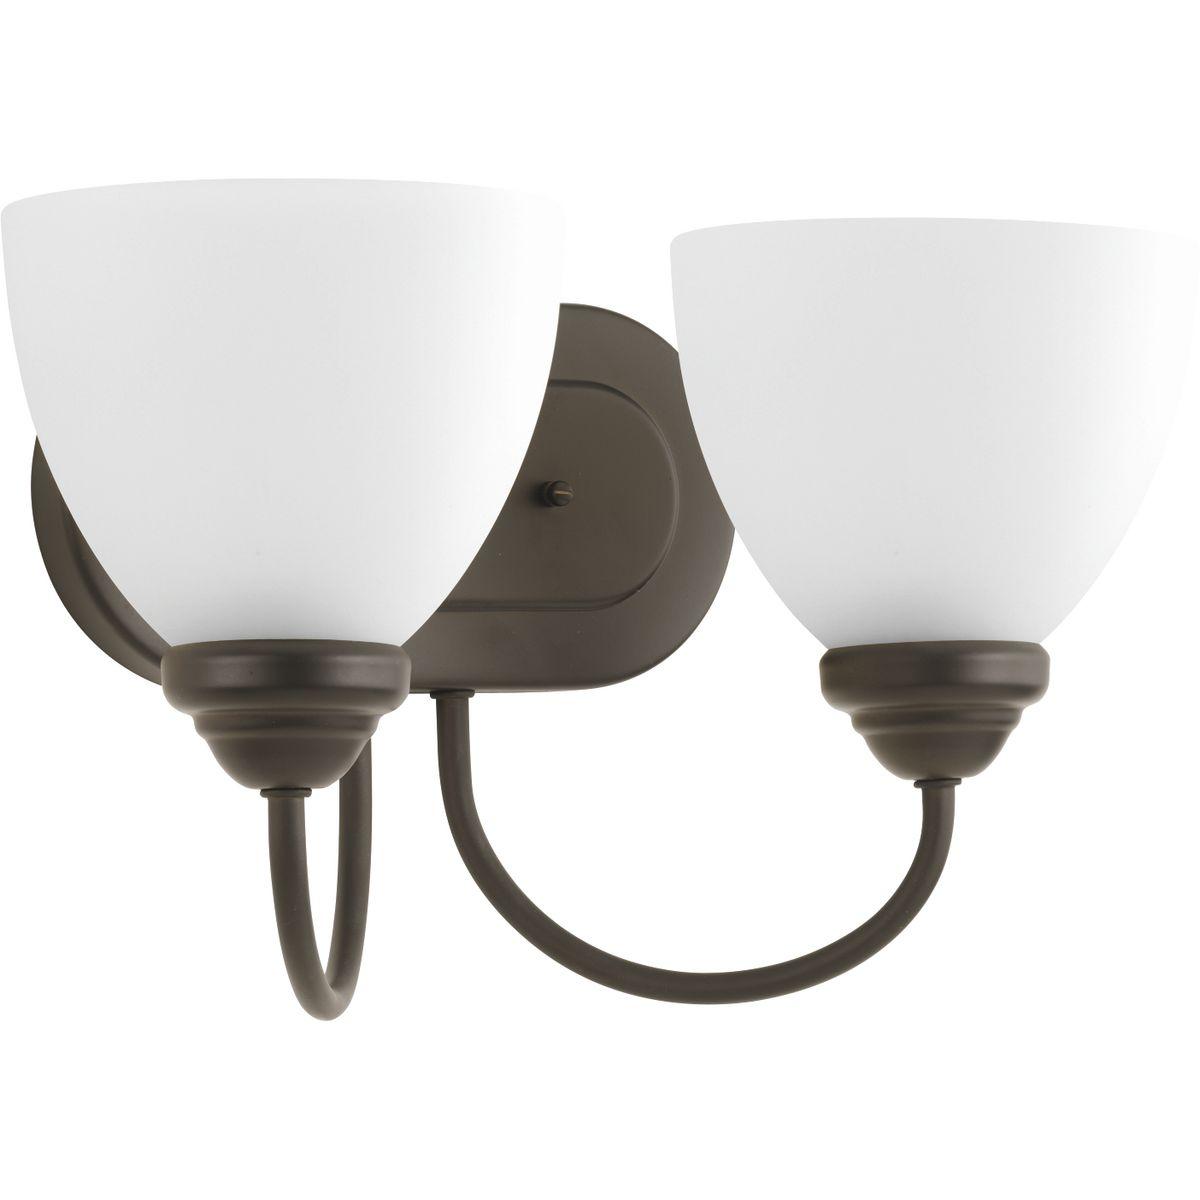 Hubbell P2915-20 The Heart Collection possesses a smart simplicity to complement today's home. This two-light bath bracket includes etched glass shades to add distinction and provide pleasing illumination to any room. Versatile design permits installation of fixture facin